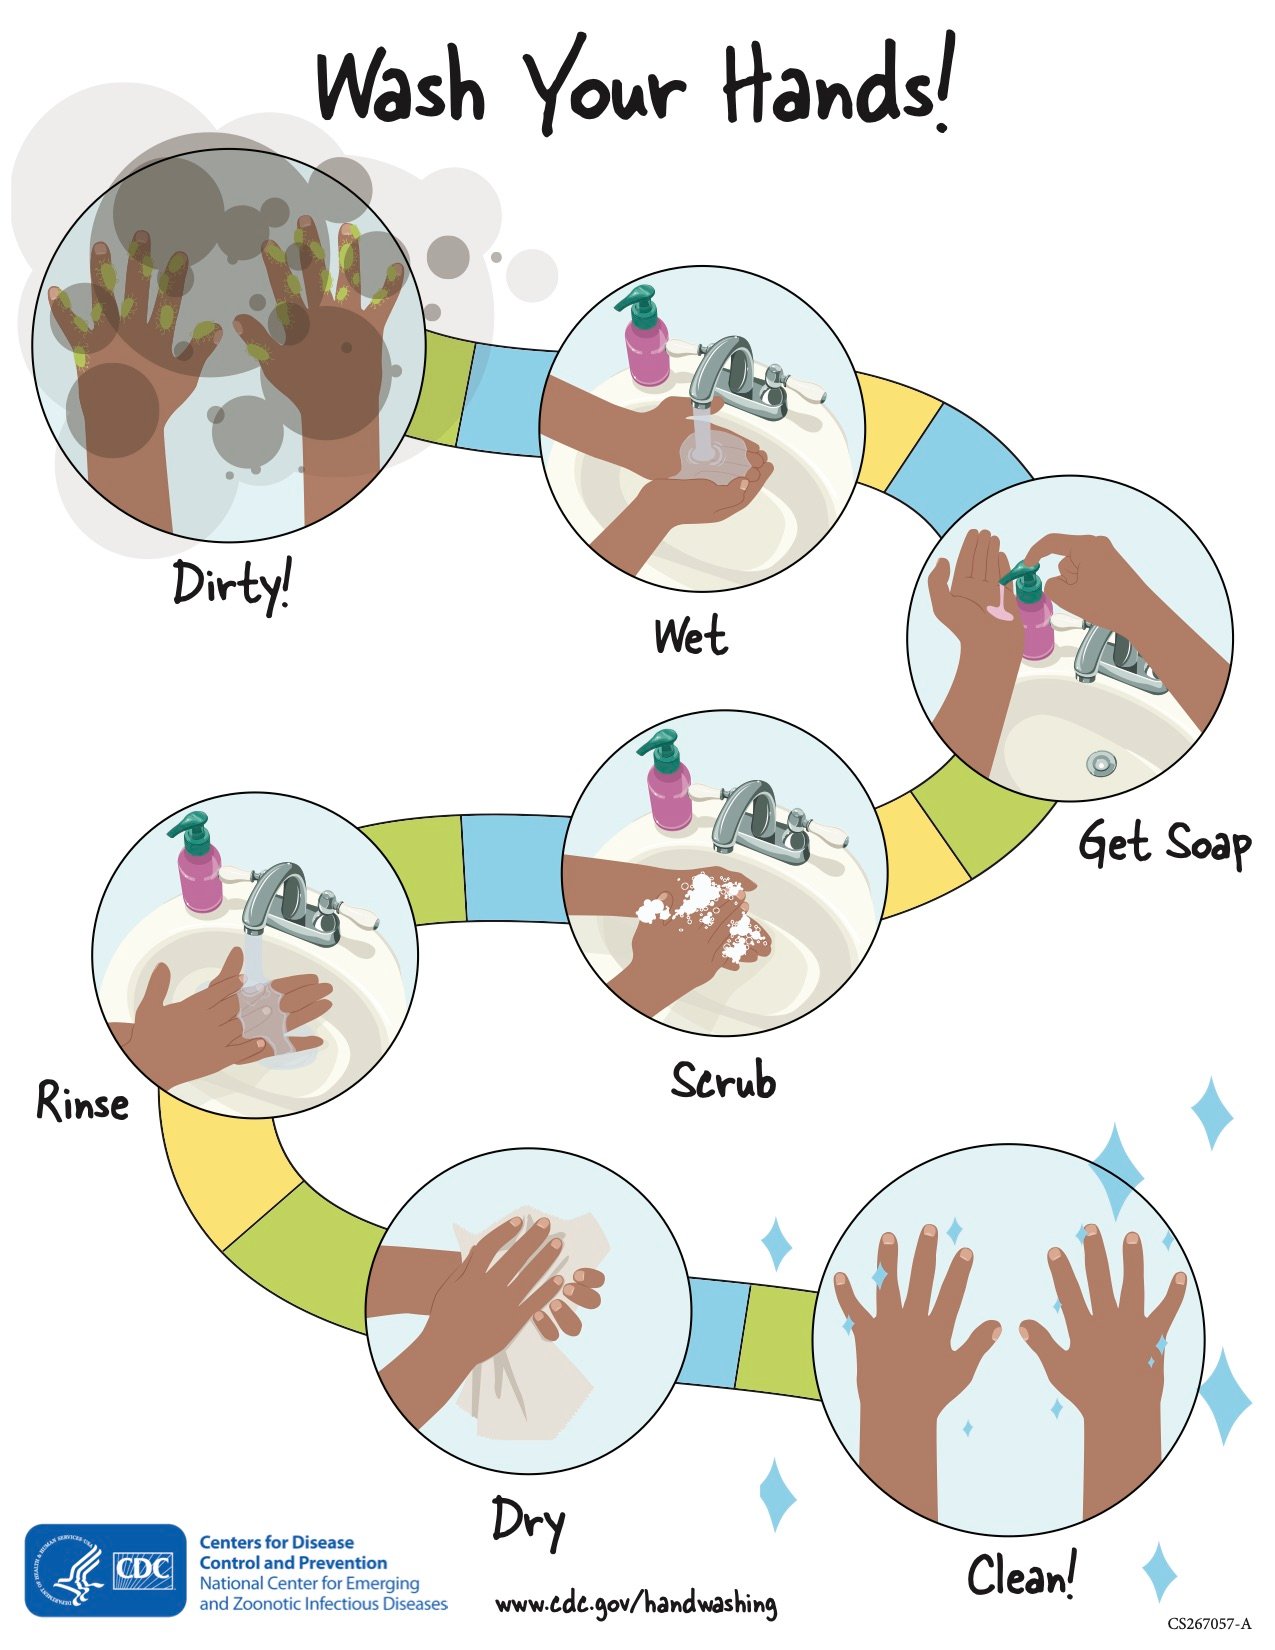 the-most-effective-way-to-wash-your-hands-according-to-science